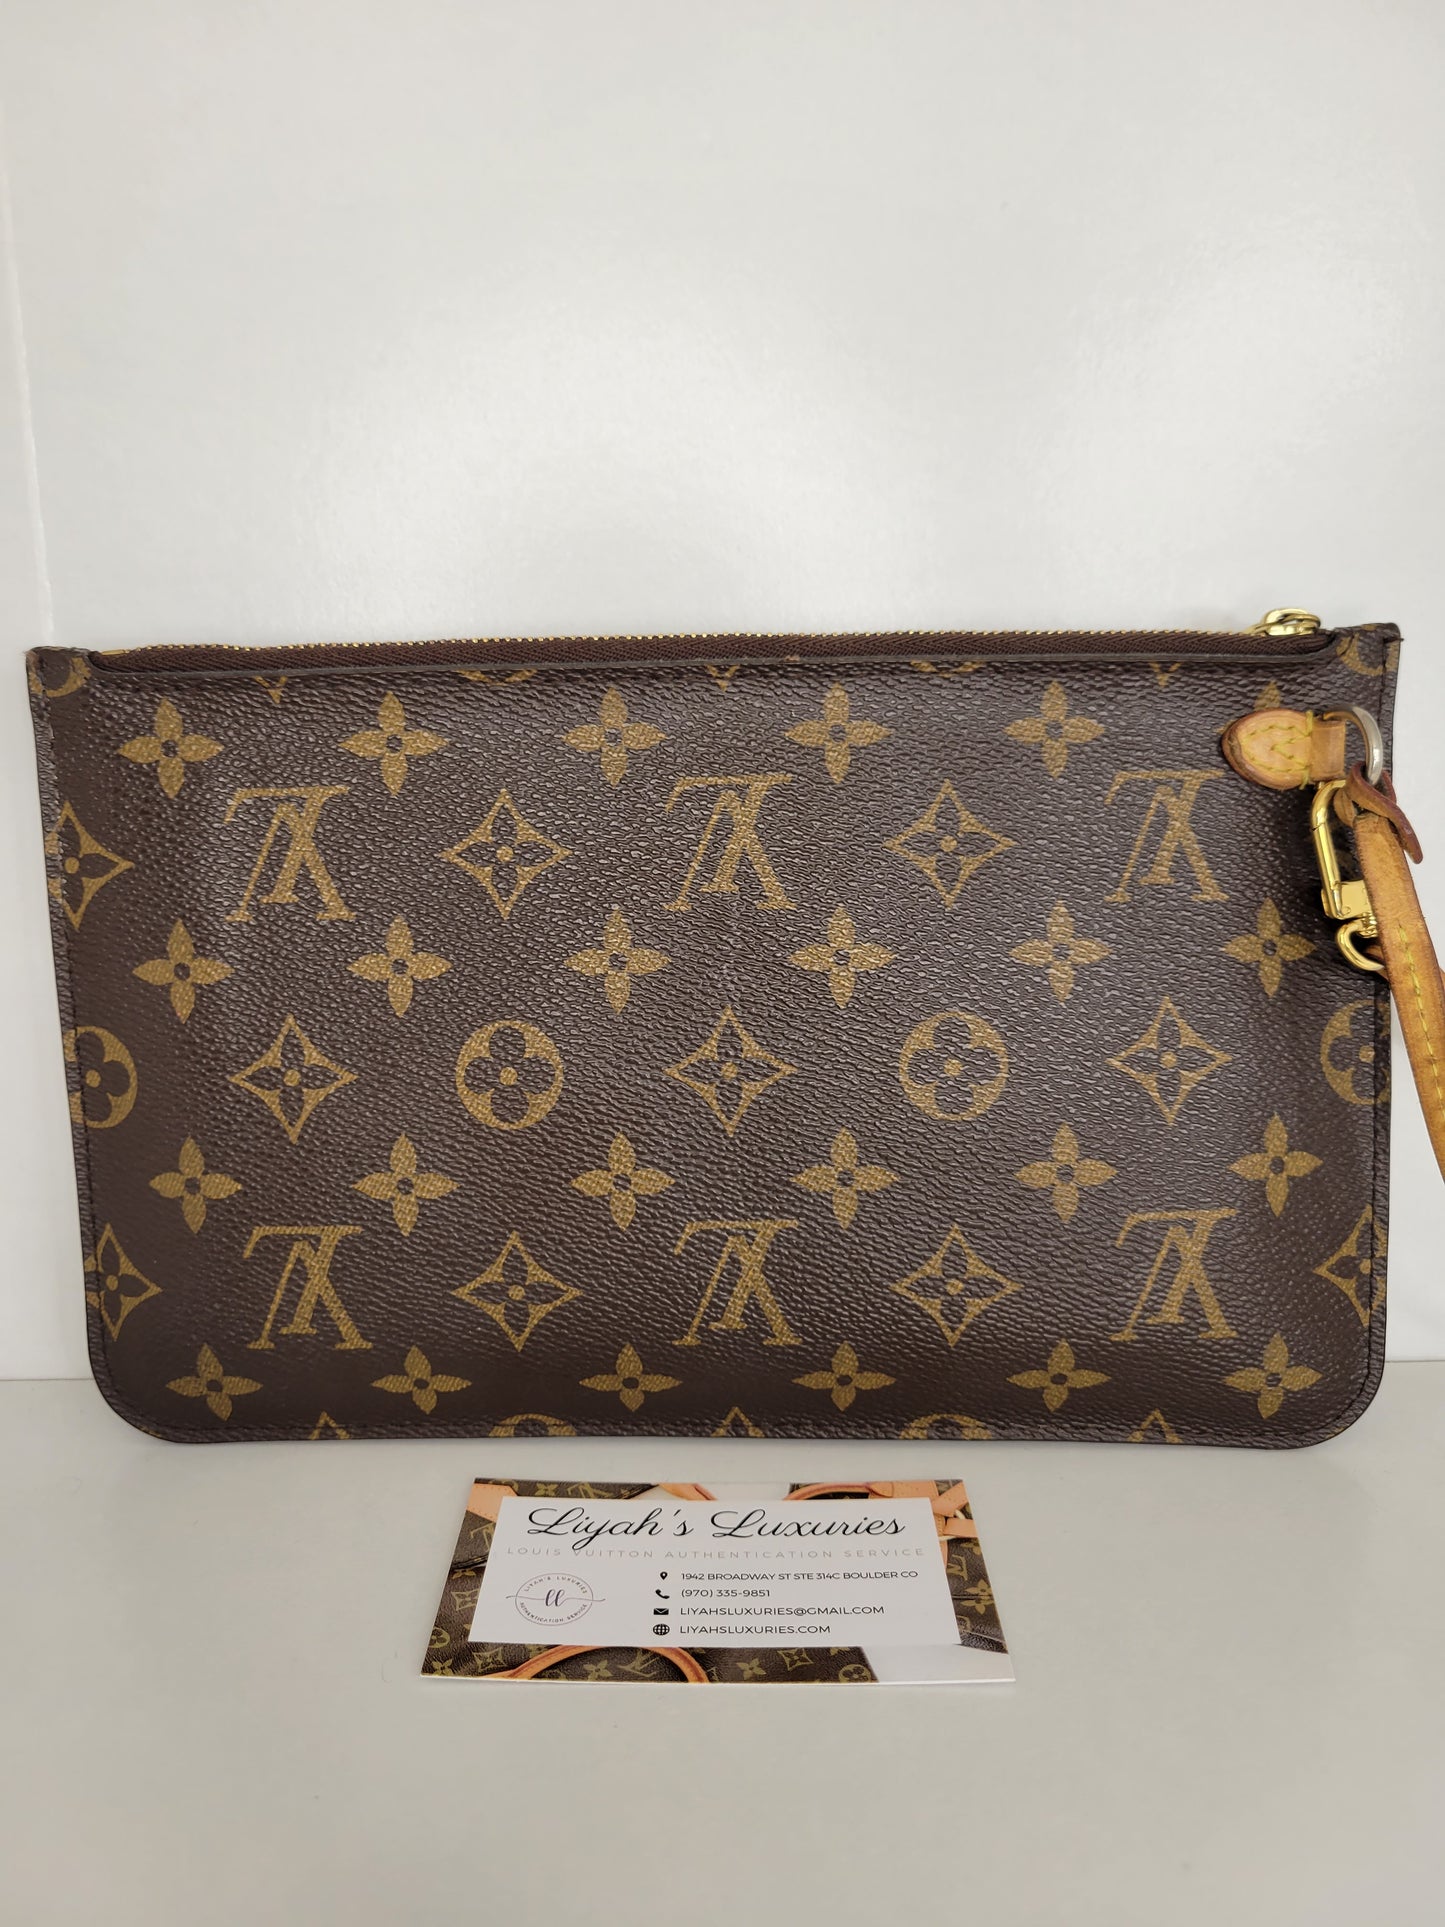 Louis Vuitton Authenticated Leather Clutch Bag